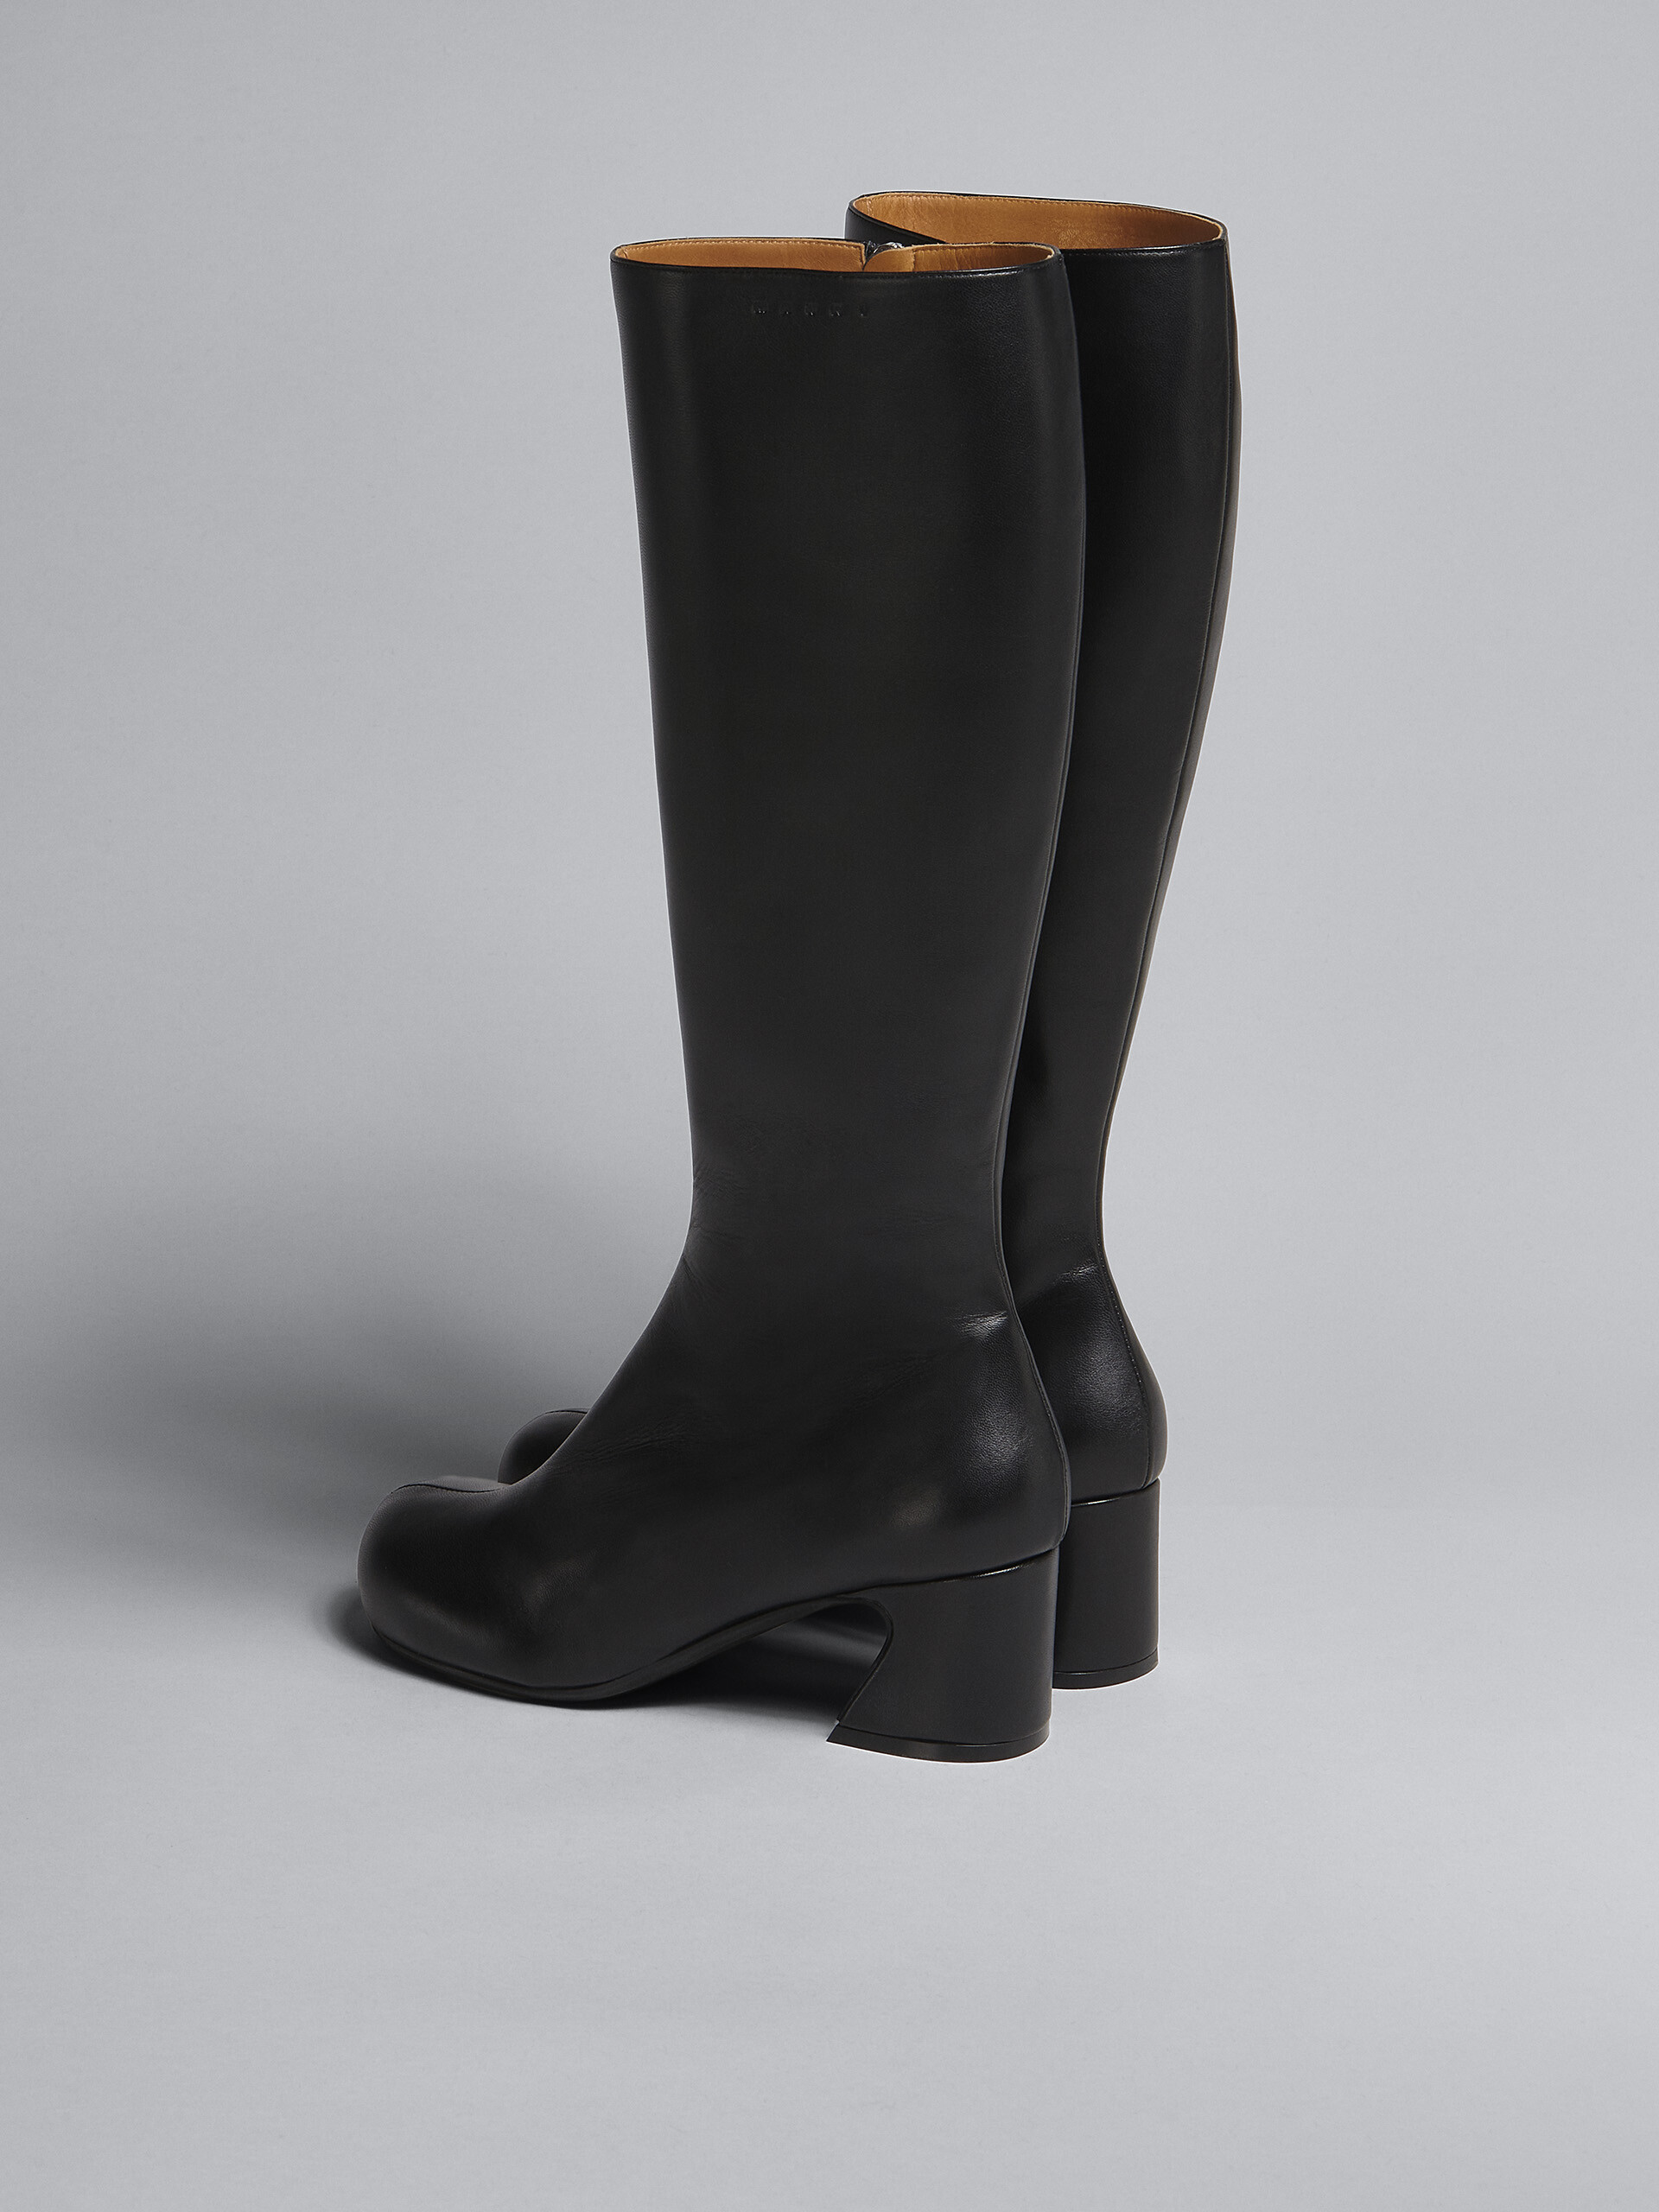 Black leather boot - Boots - Image 3